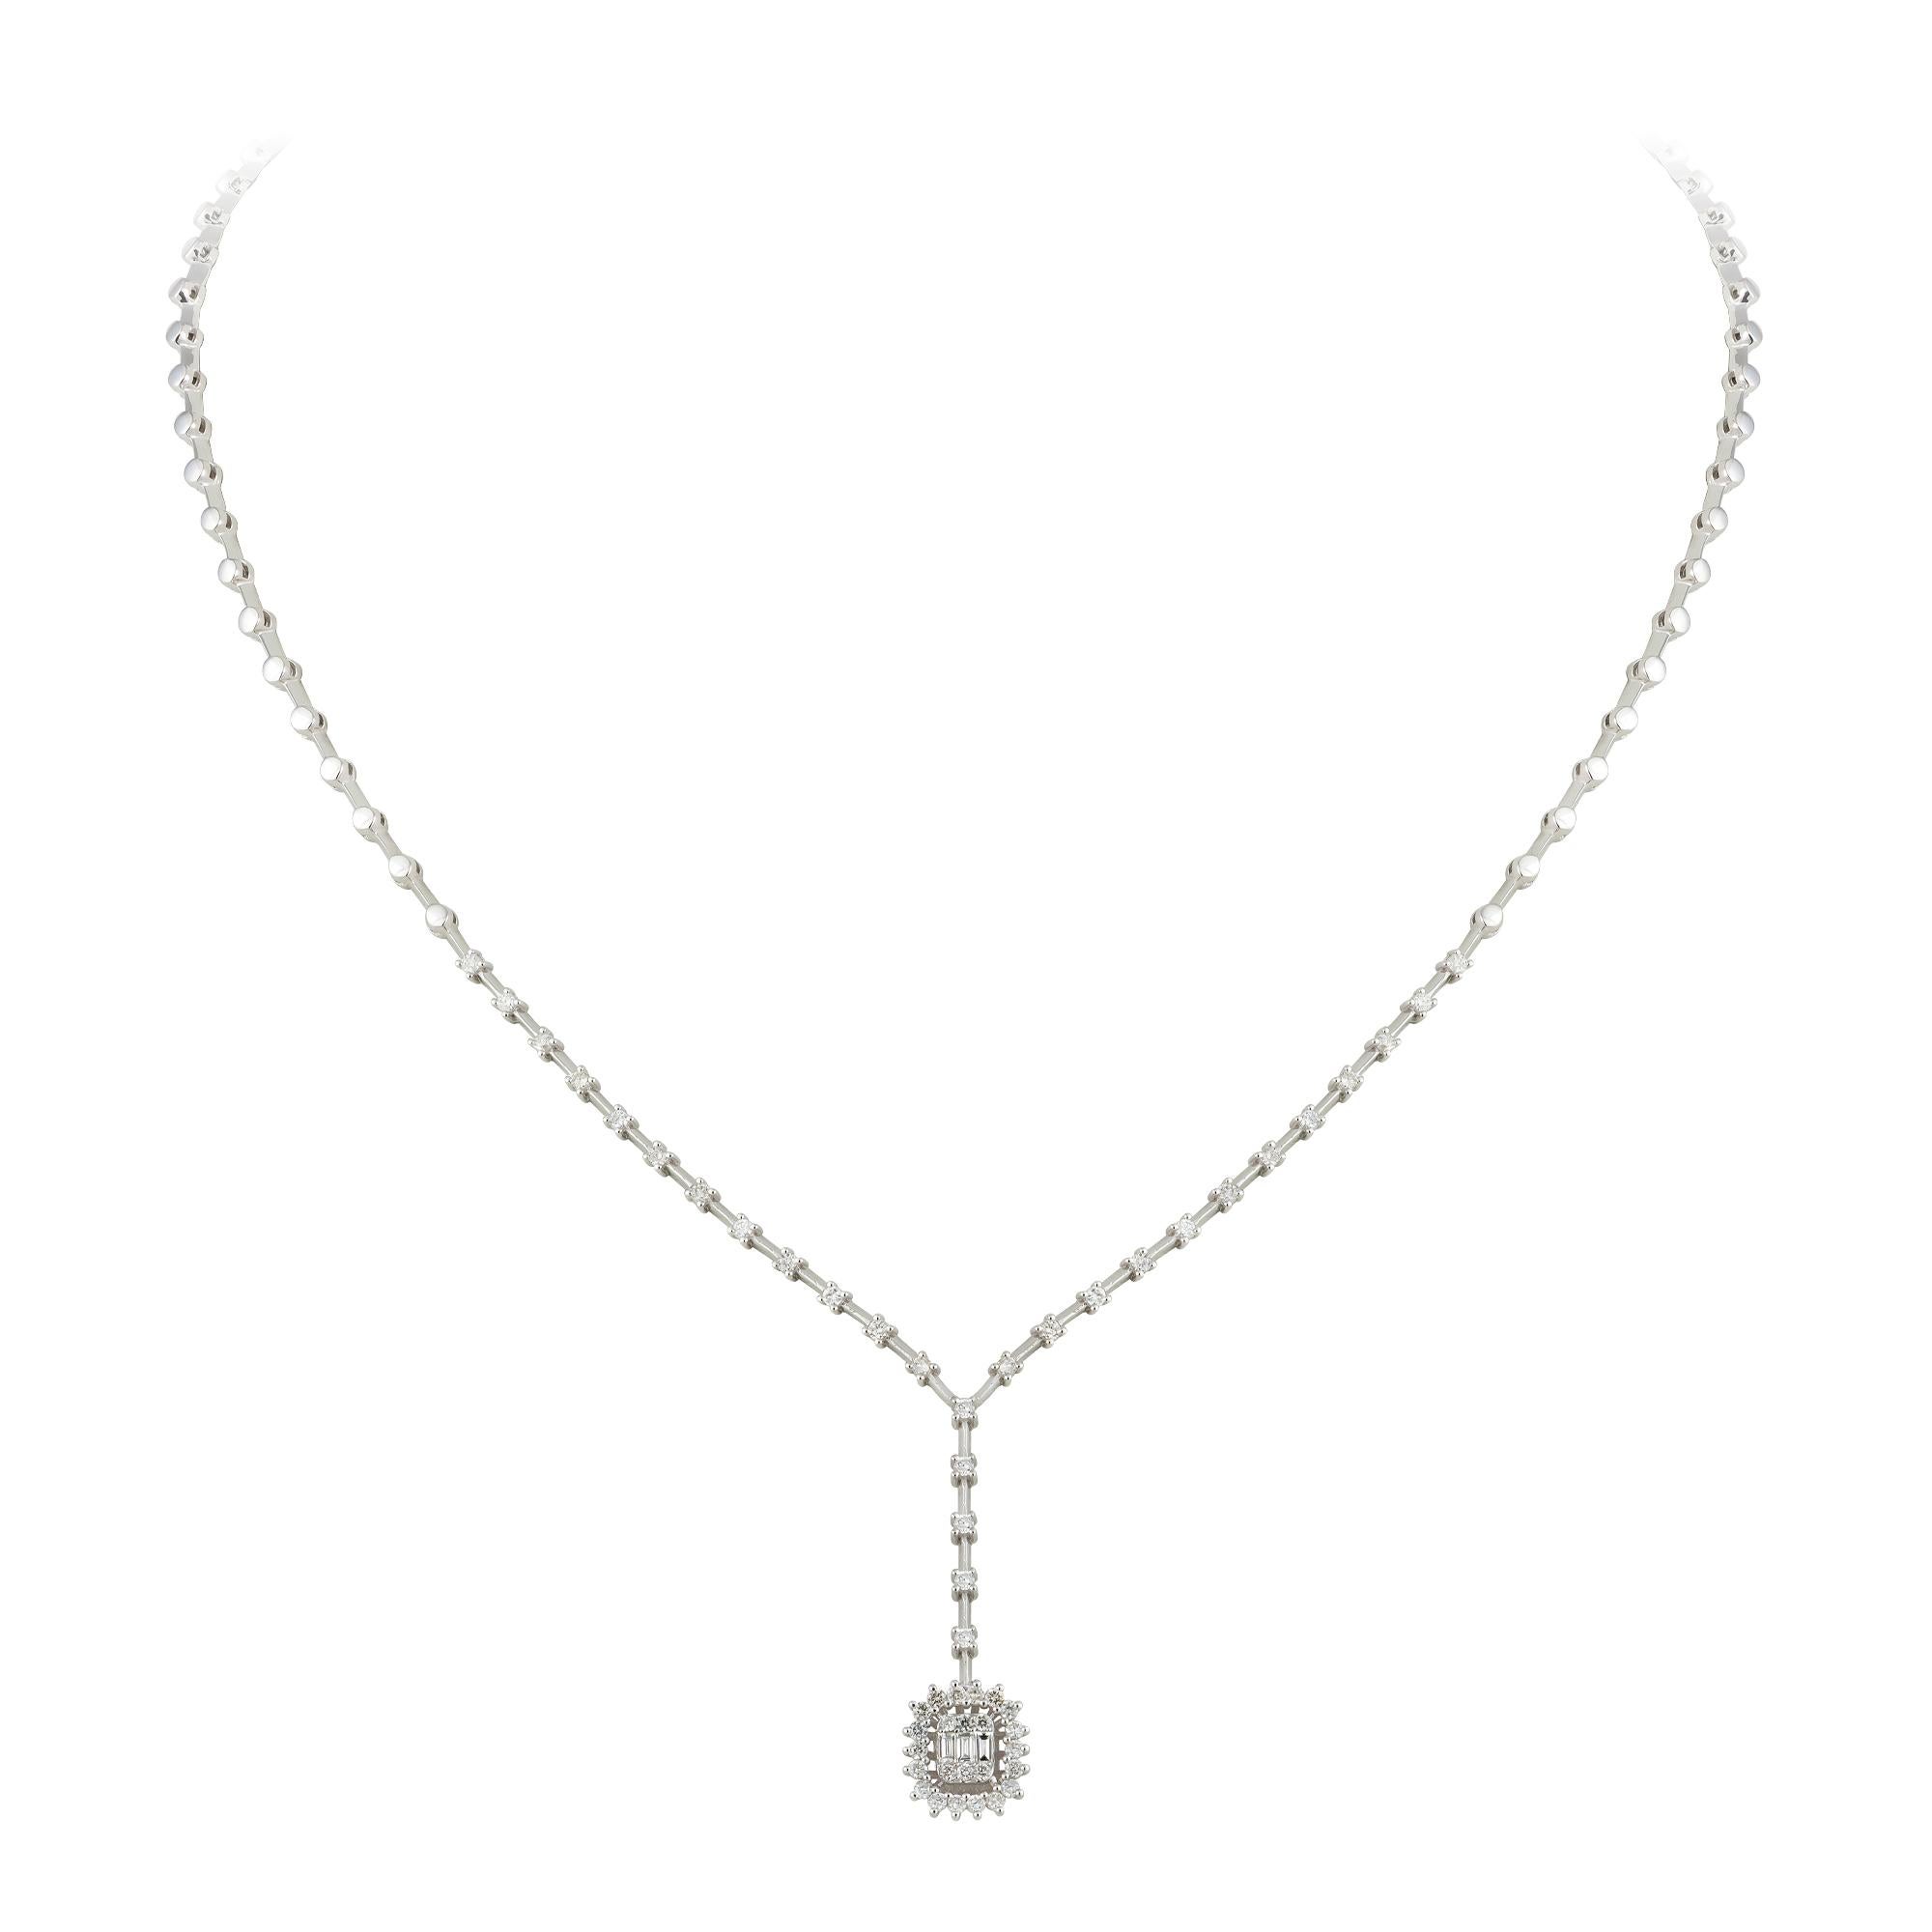 NECKLACE 18K White Gold Diamond 0.62 Cts/53 Pcs Tapered Baguette 0.07 Cts/3 Pcs
